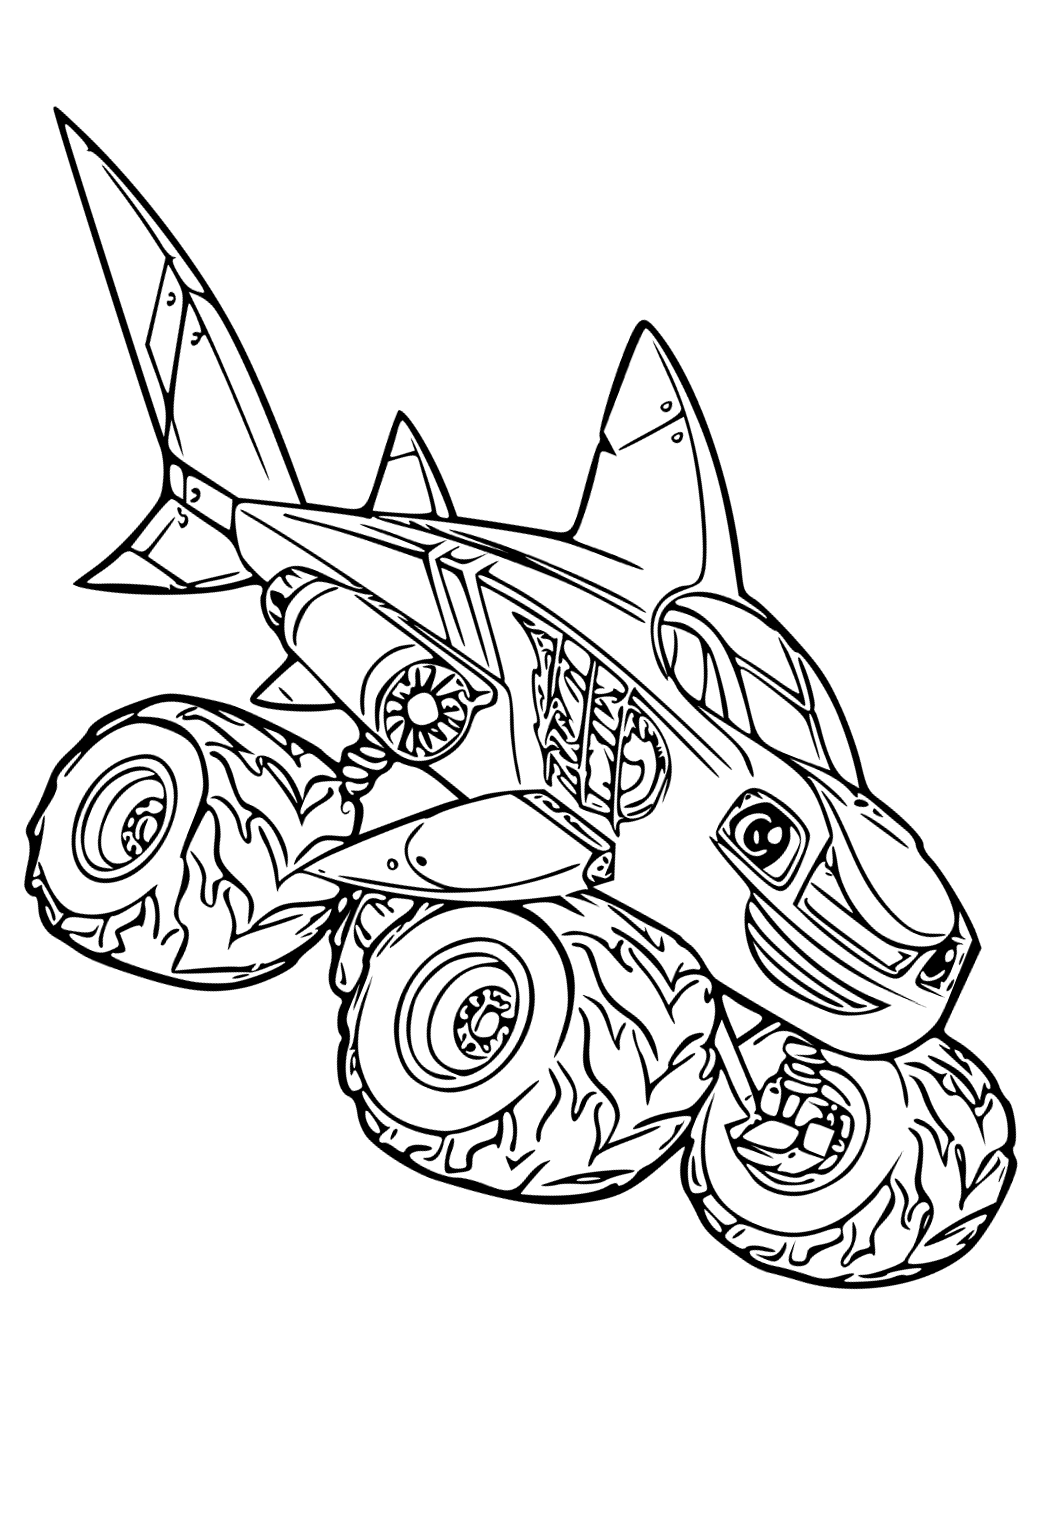 Free Printable Blaze and the Monster Machines Shark Coloring Page for ...